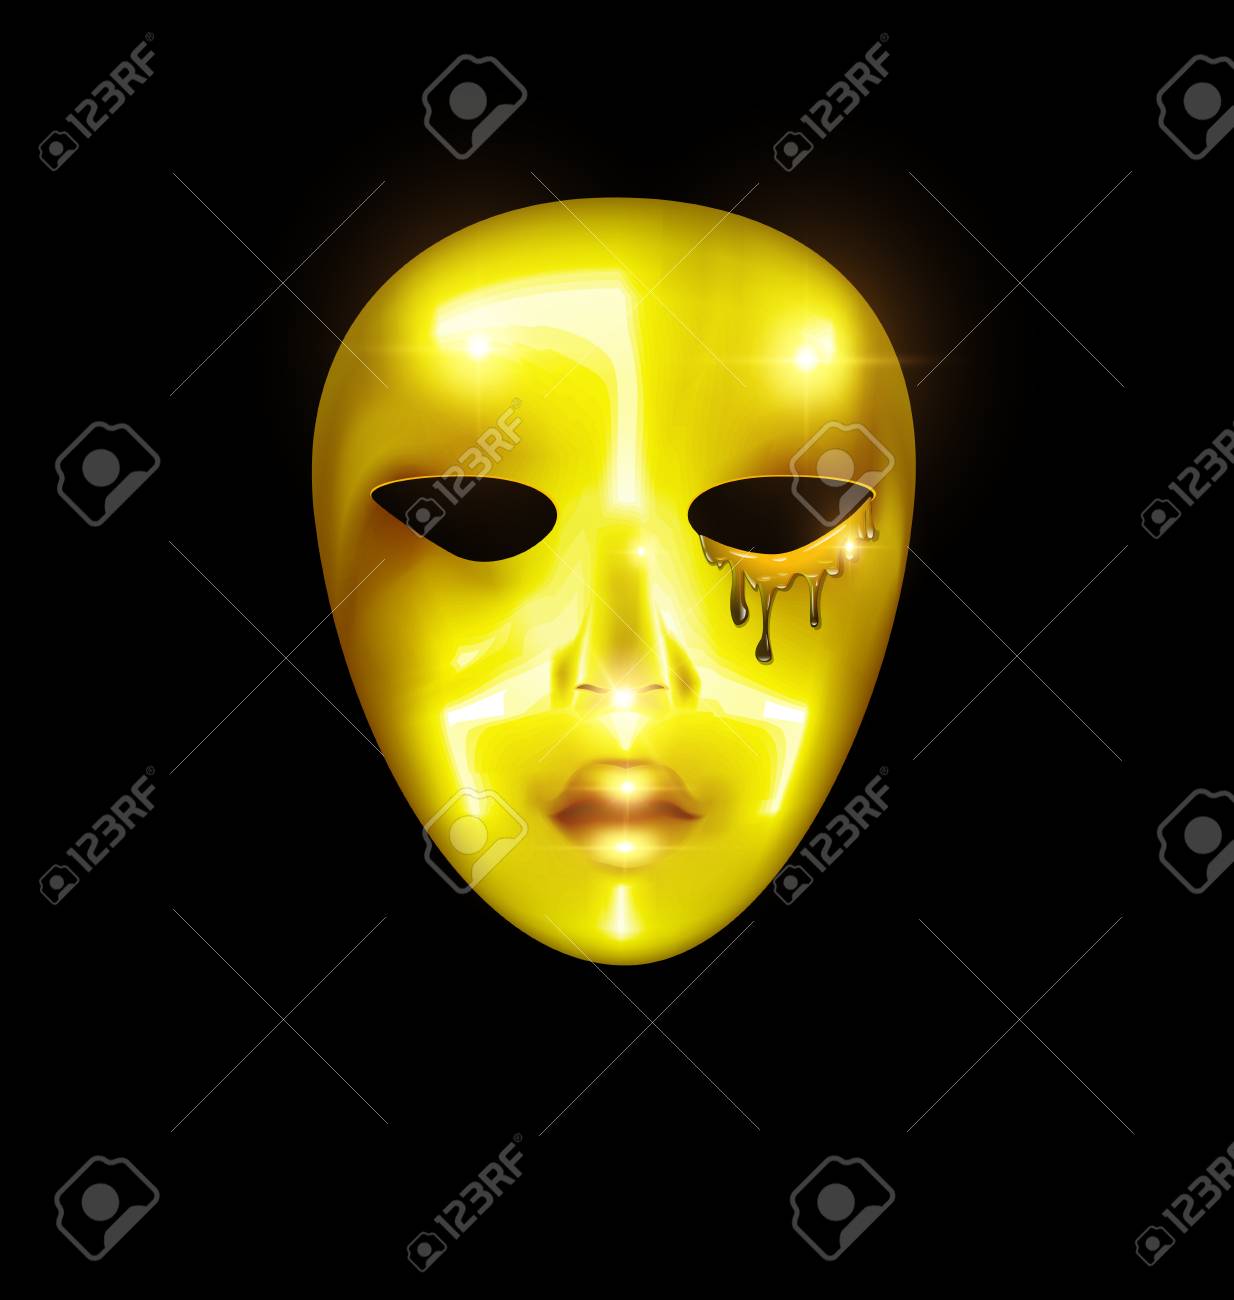 Dark Background And Carnival Golden Mask Of Crying Face Royalty